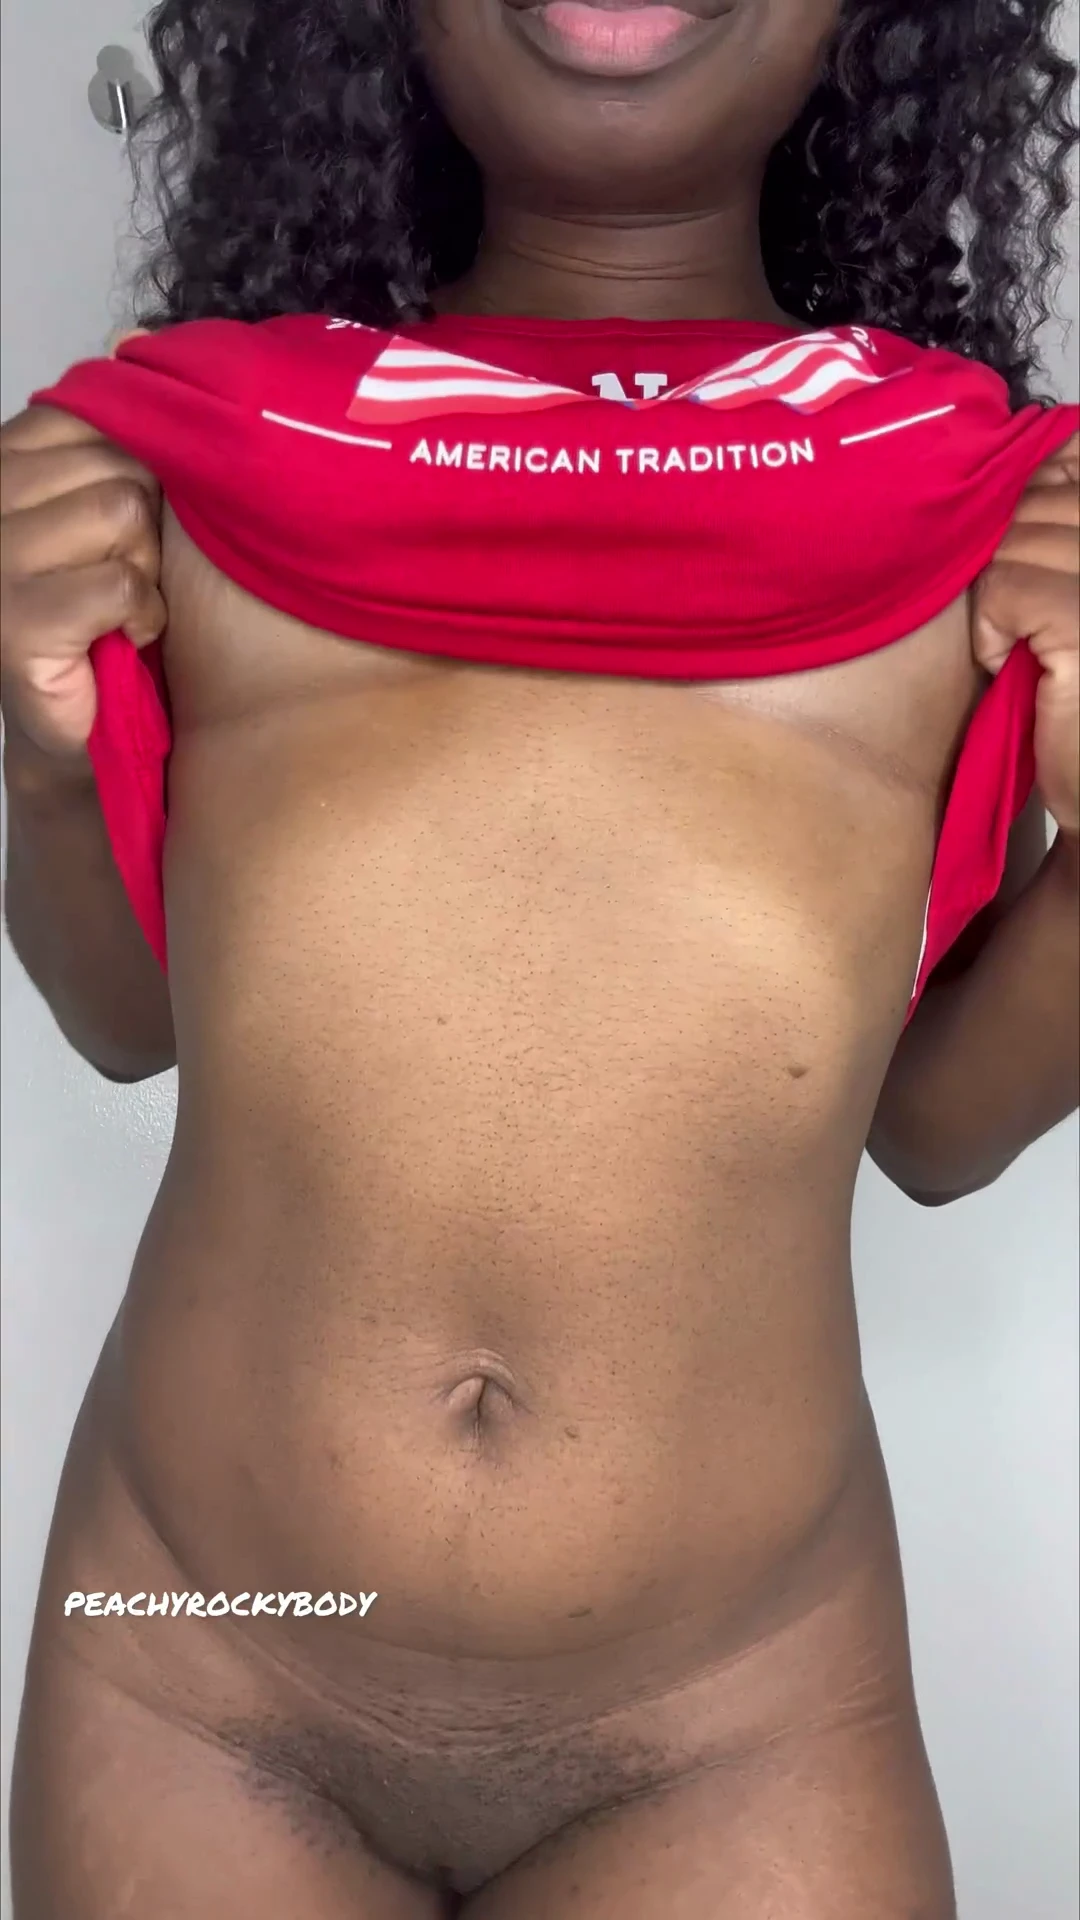 Giving out free titty fucks this Fourth of July 👀